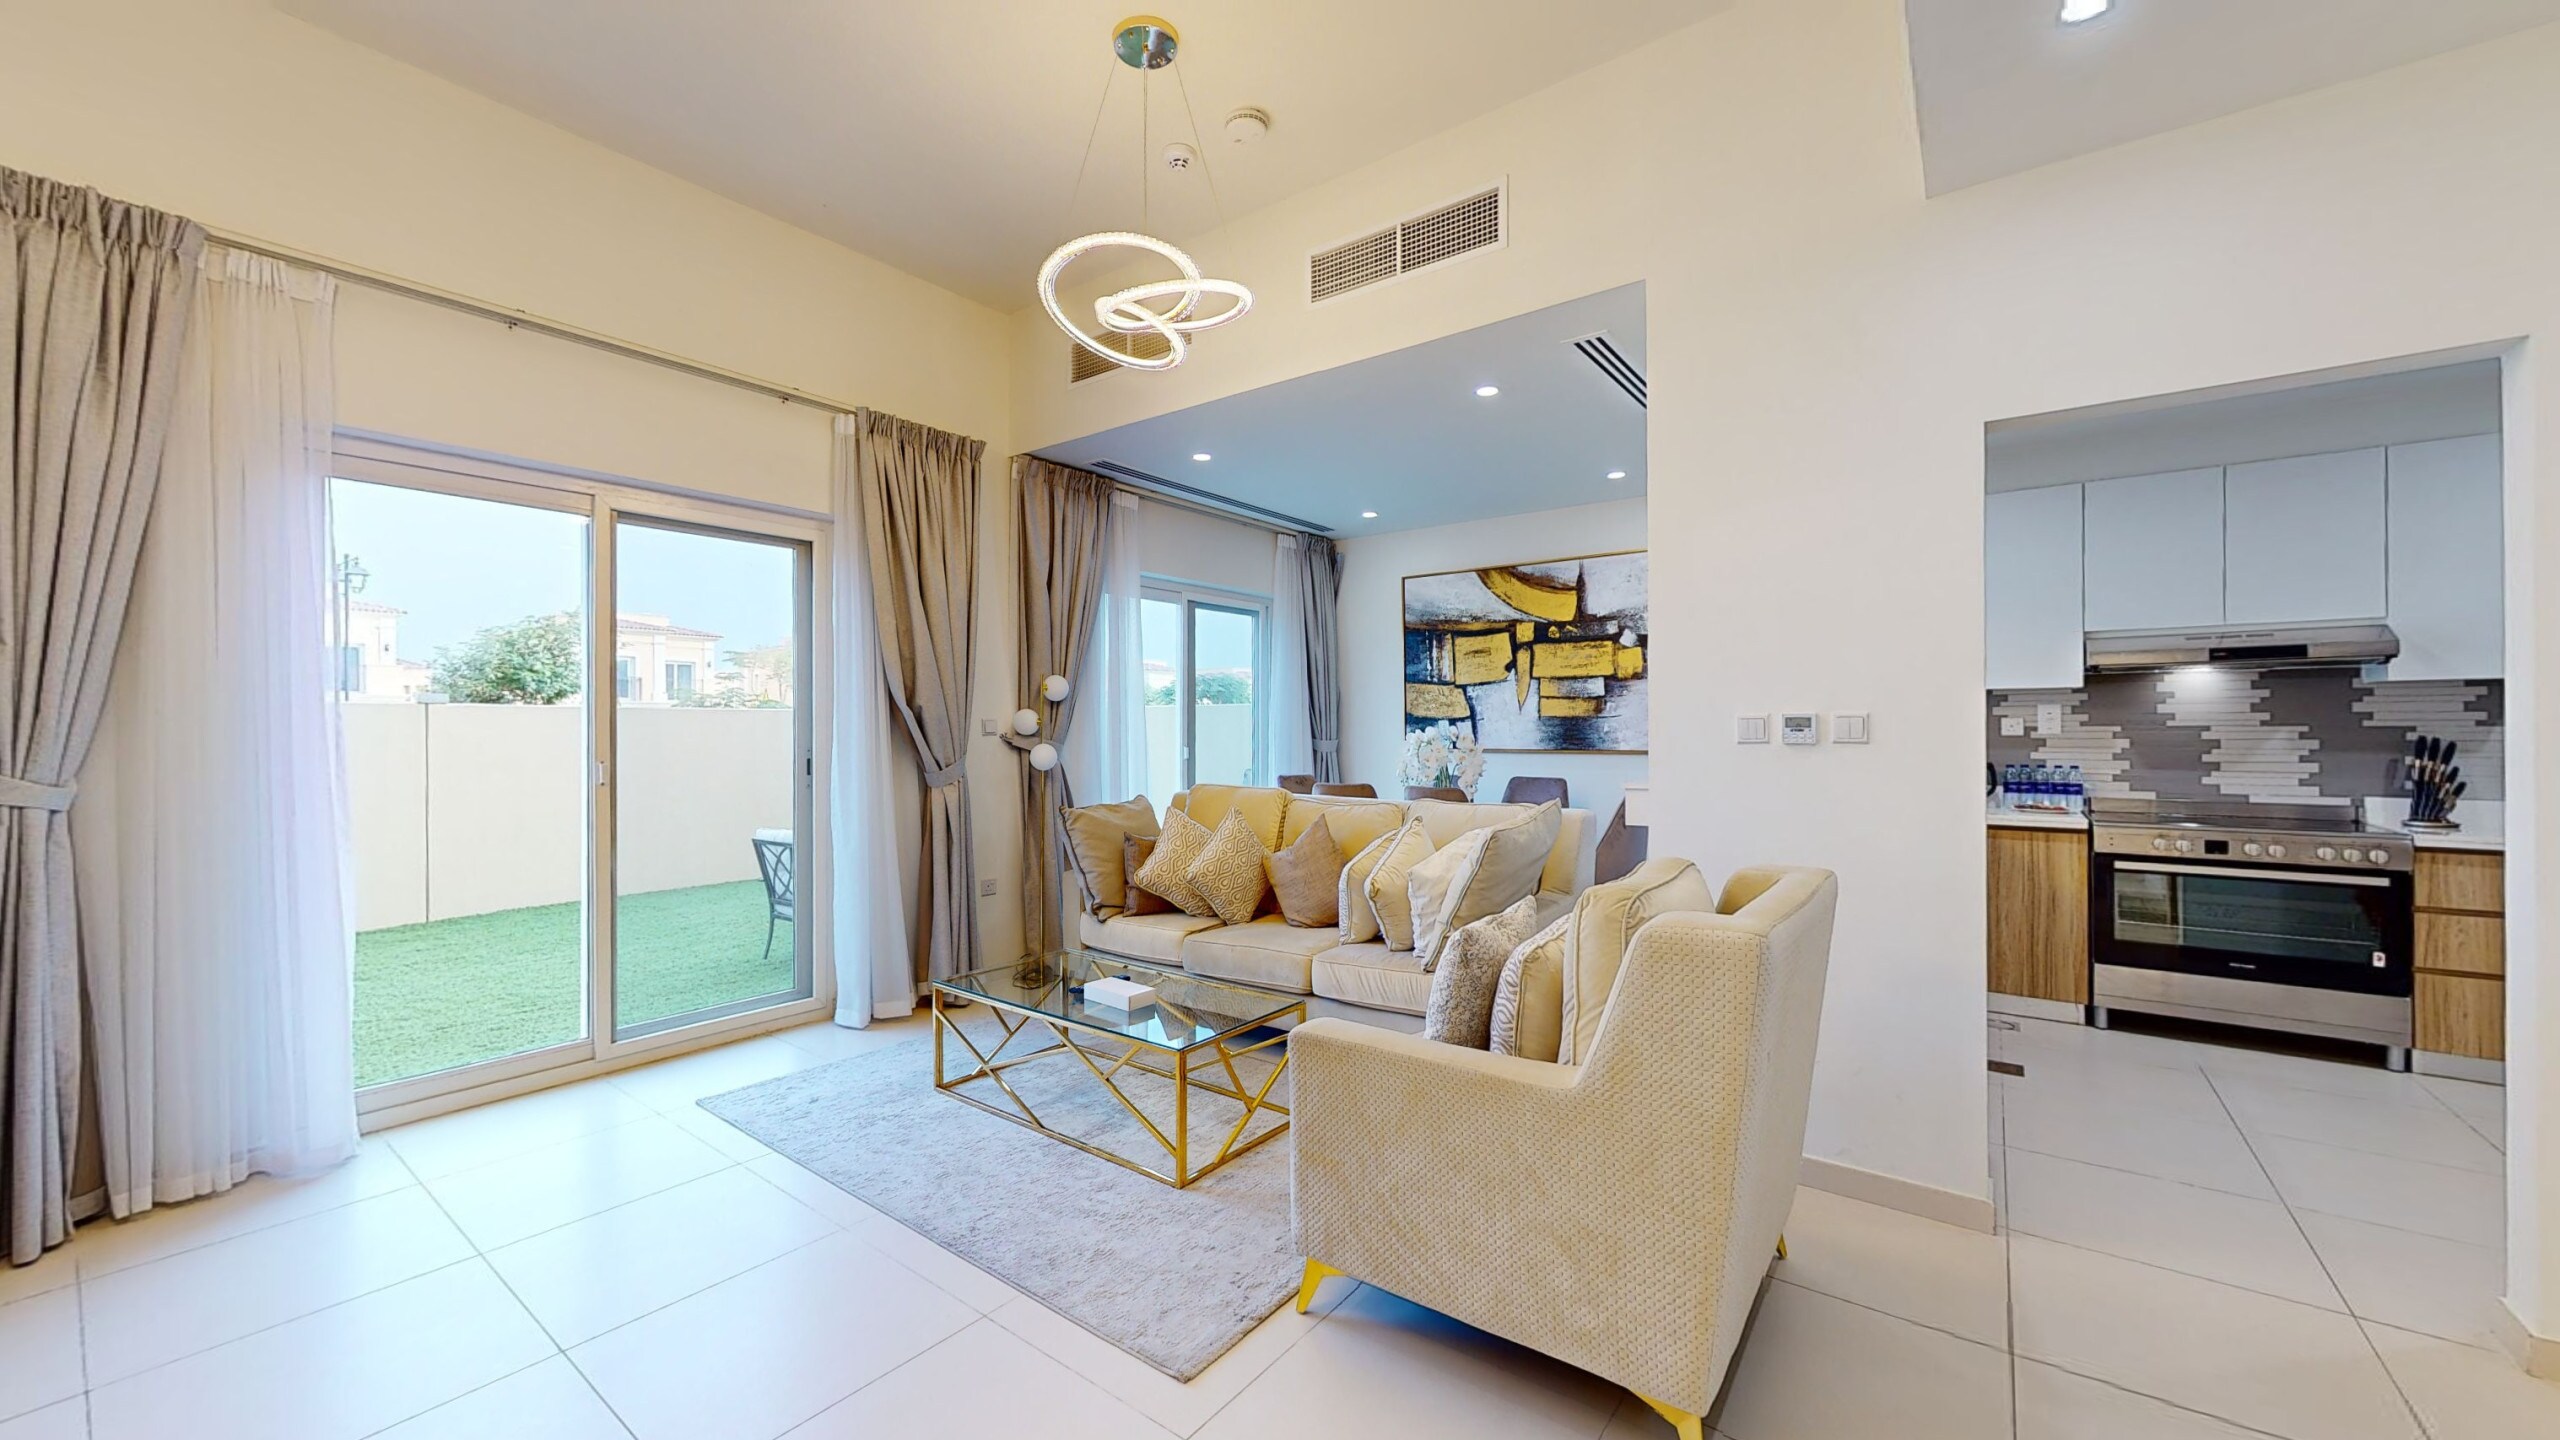 Property Image 1 - Property Manager - Tranquil 3BR with Private Garden in Dubai Land